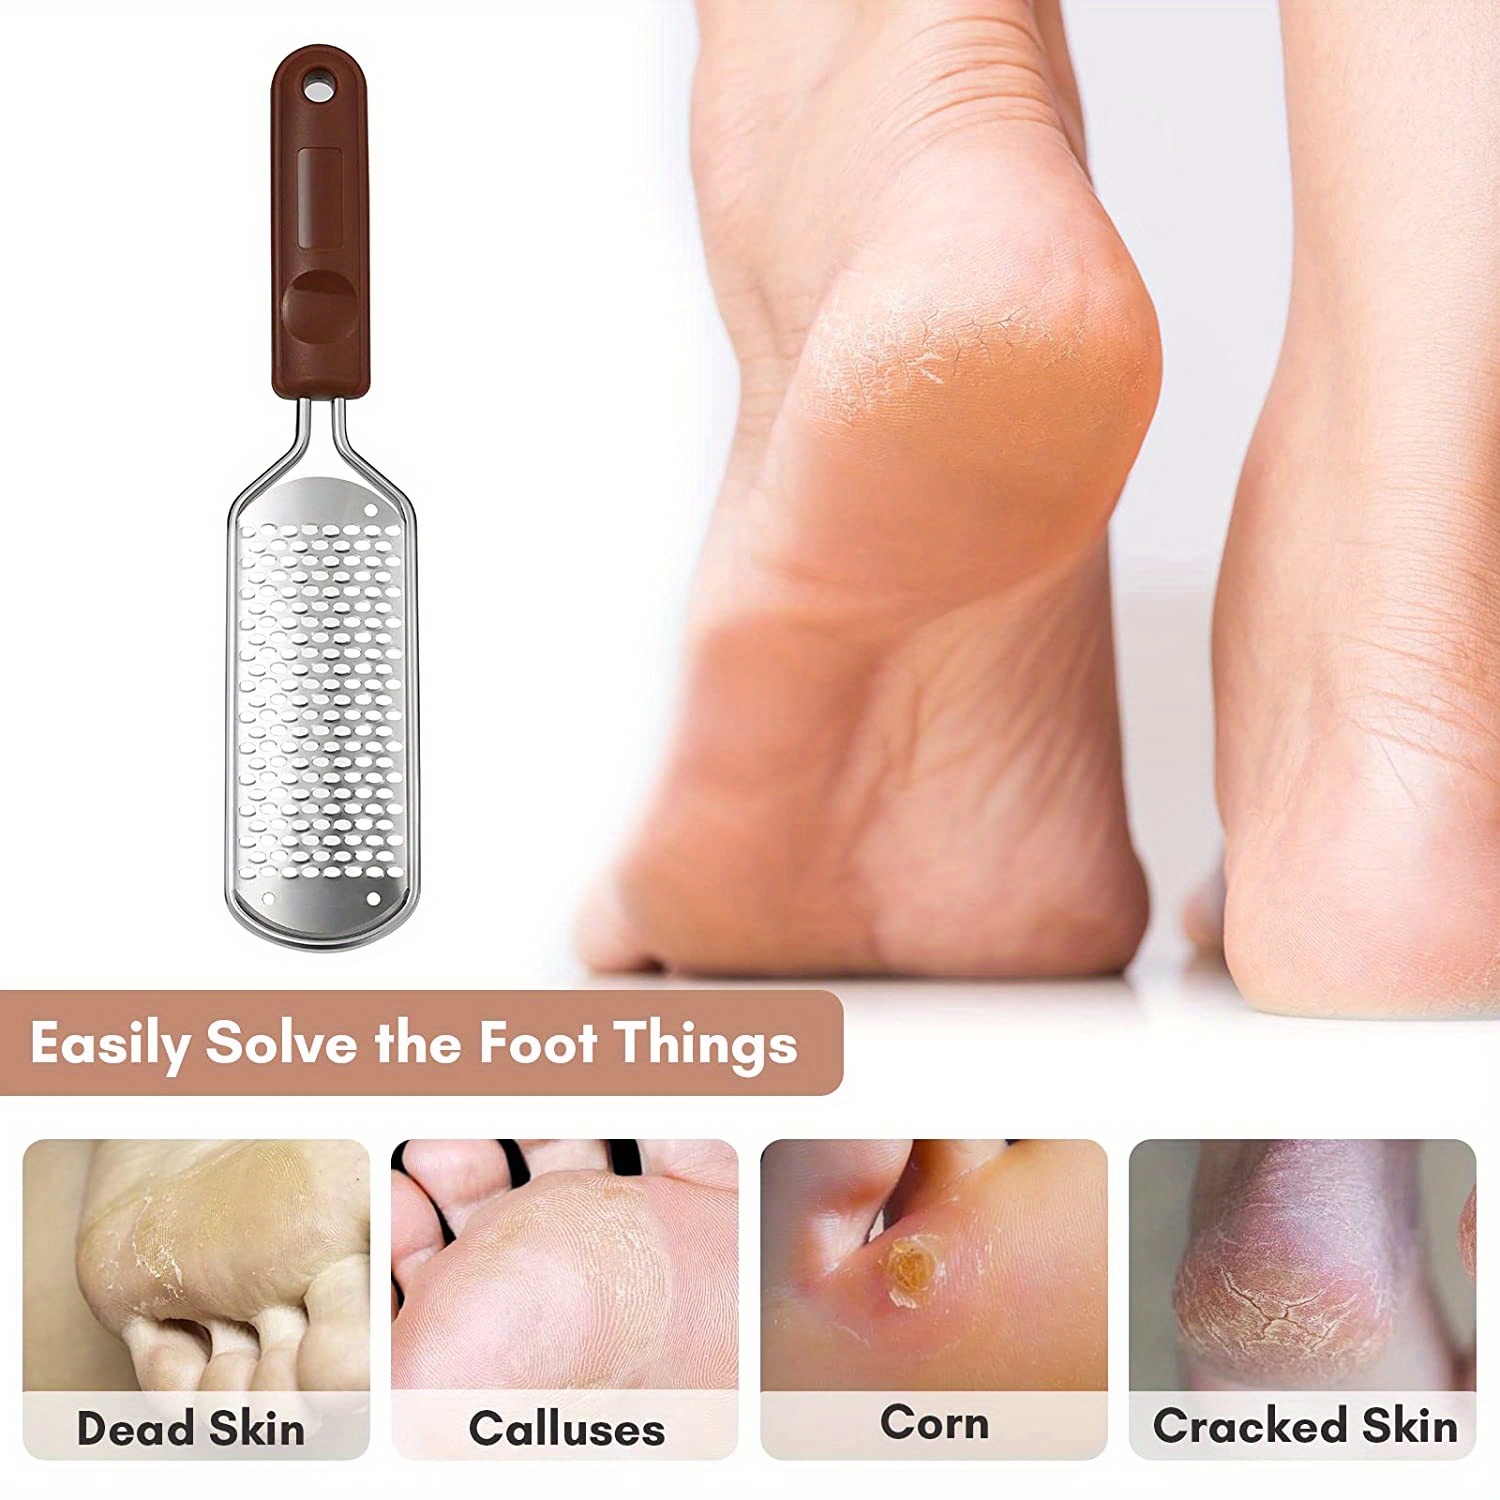 MAYU Foot File Callus Remover Foot Scrubber,Professional Pedicure Foot Rasp  Removes Cracked Heels,Dead Skin,Corn,Hard Skin,Pumice Stone for Feet Scraper  File Brush Tools for Wet and Dry Feet 